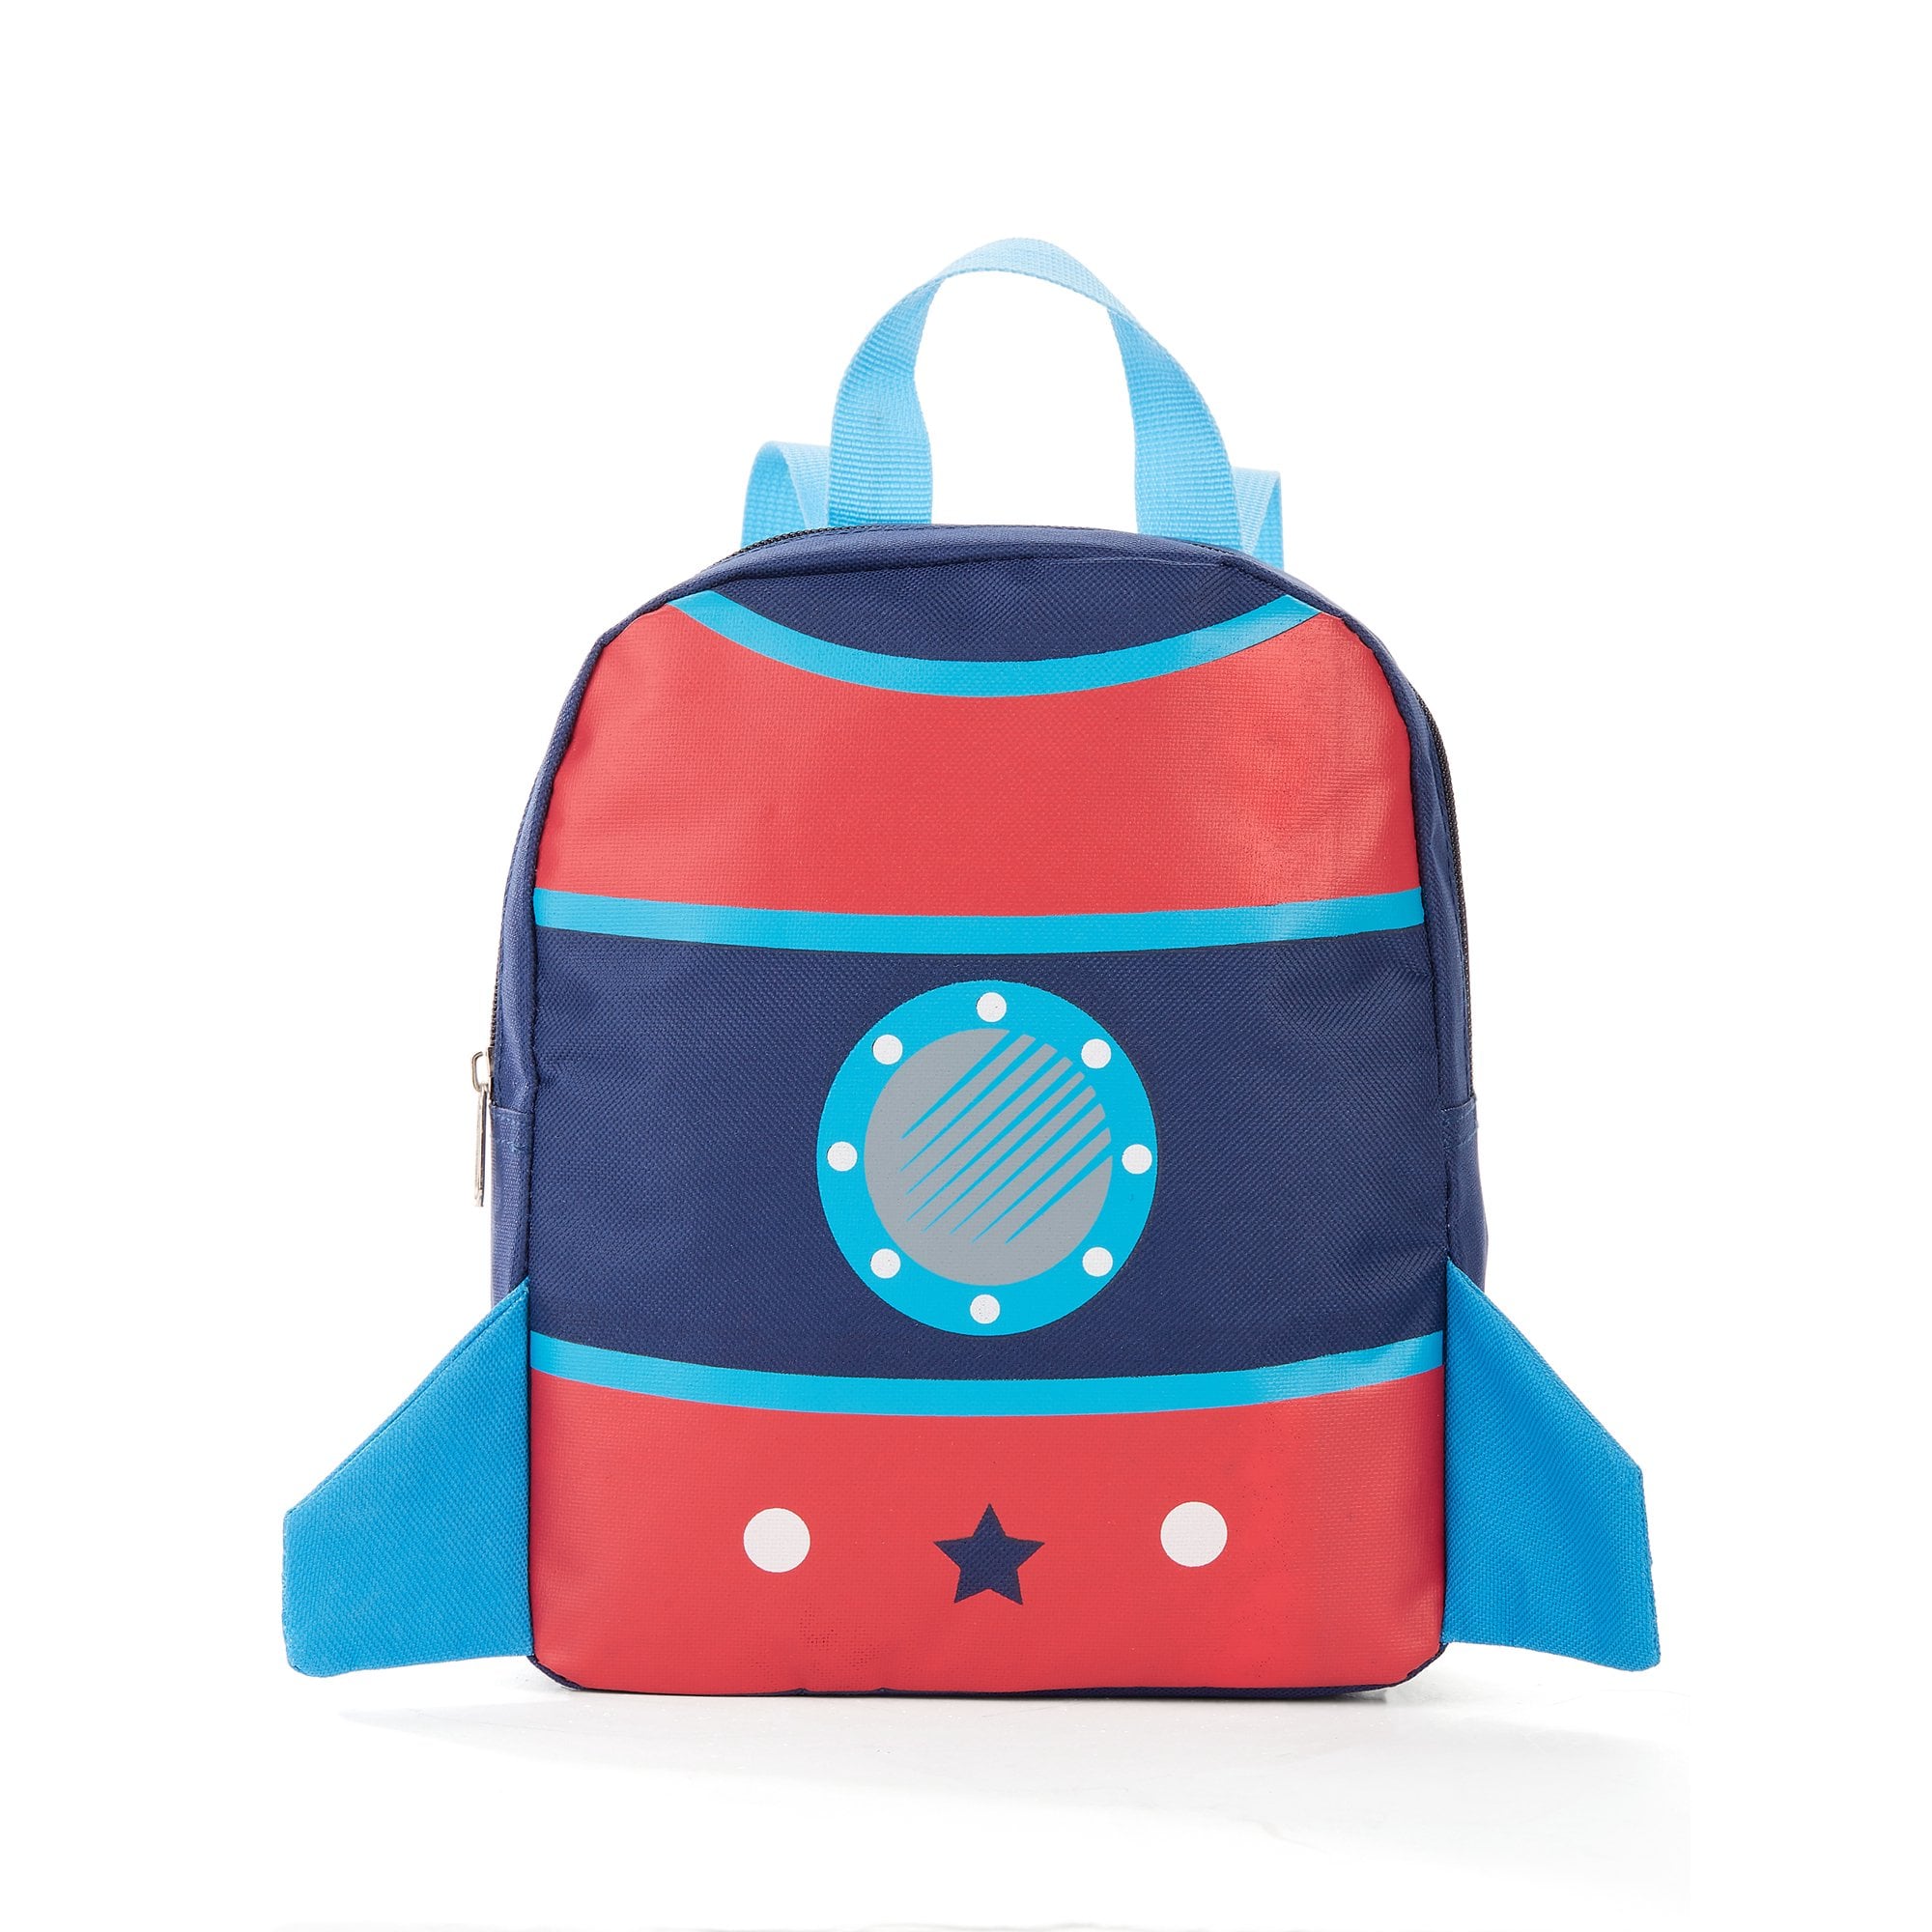 The Best Backpacks For Kids at Walmart 